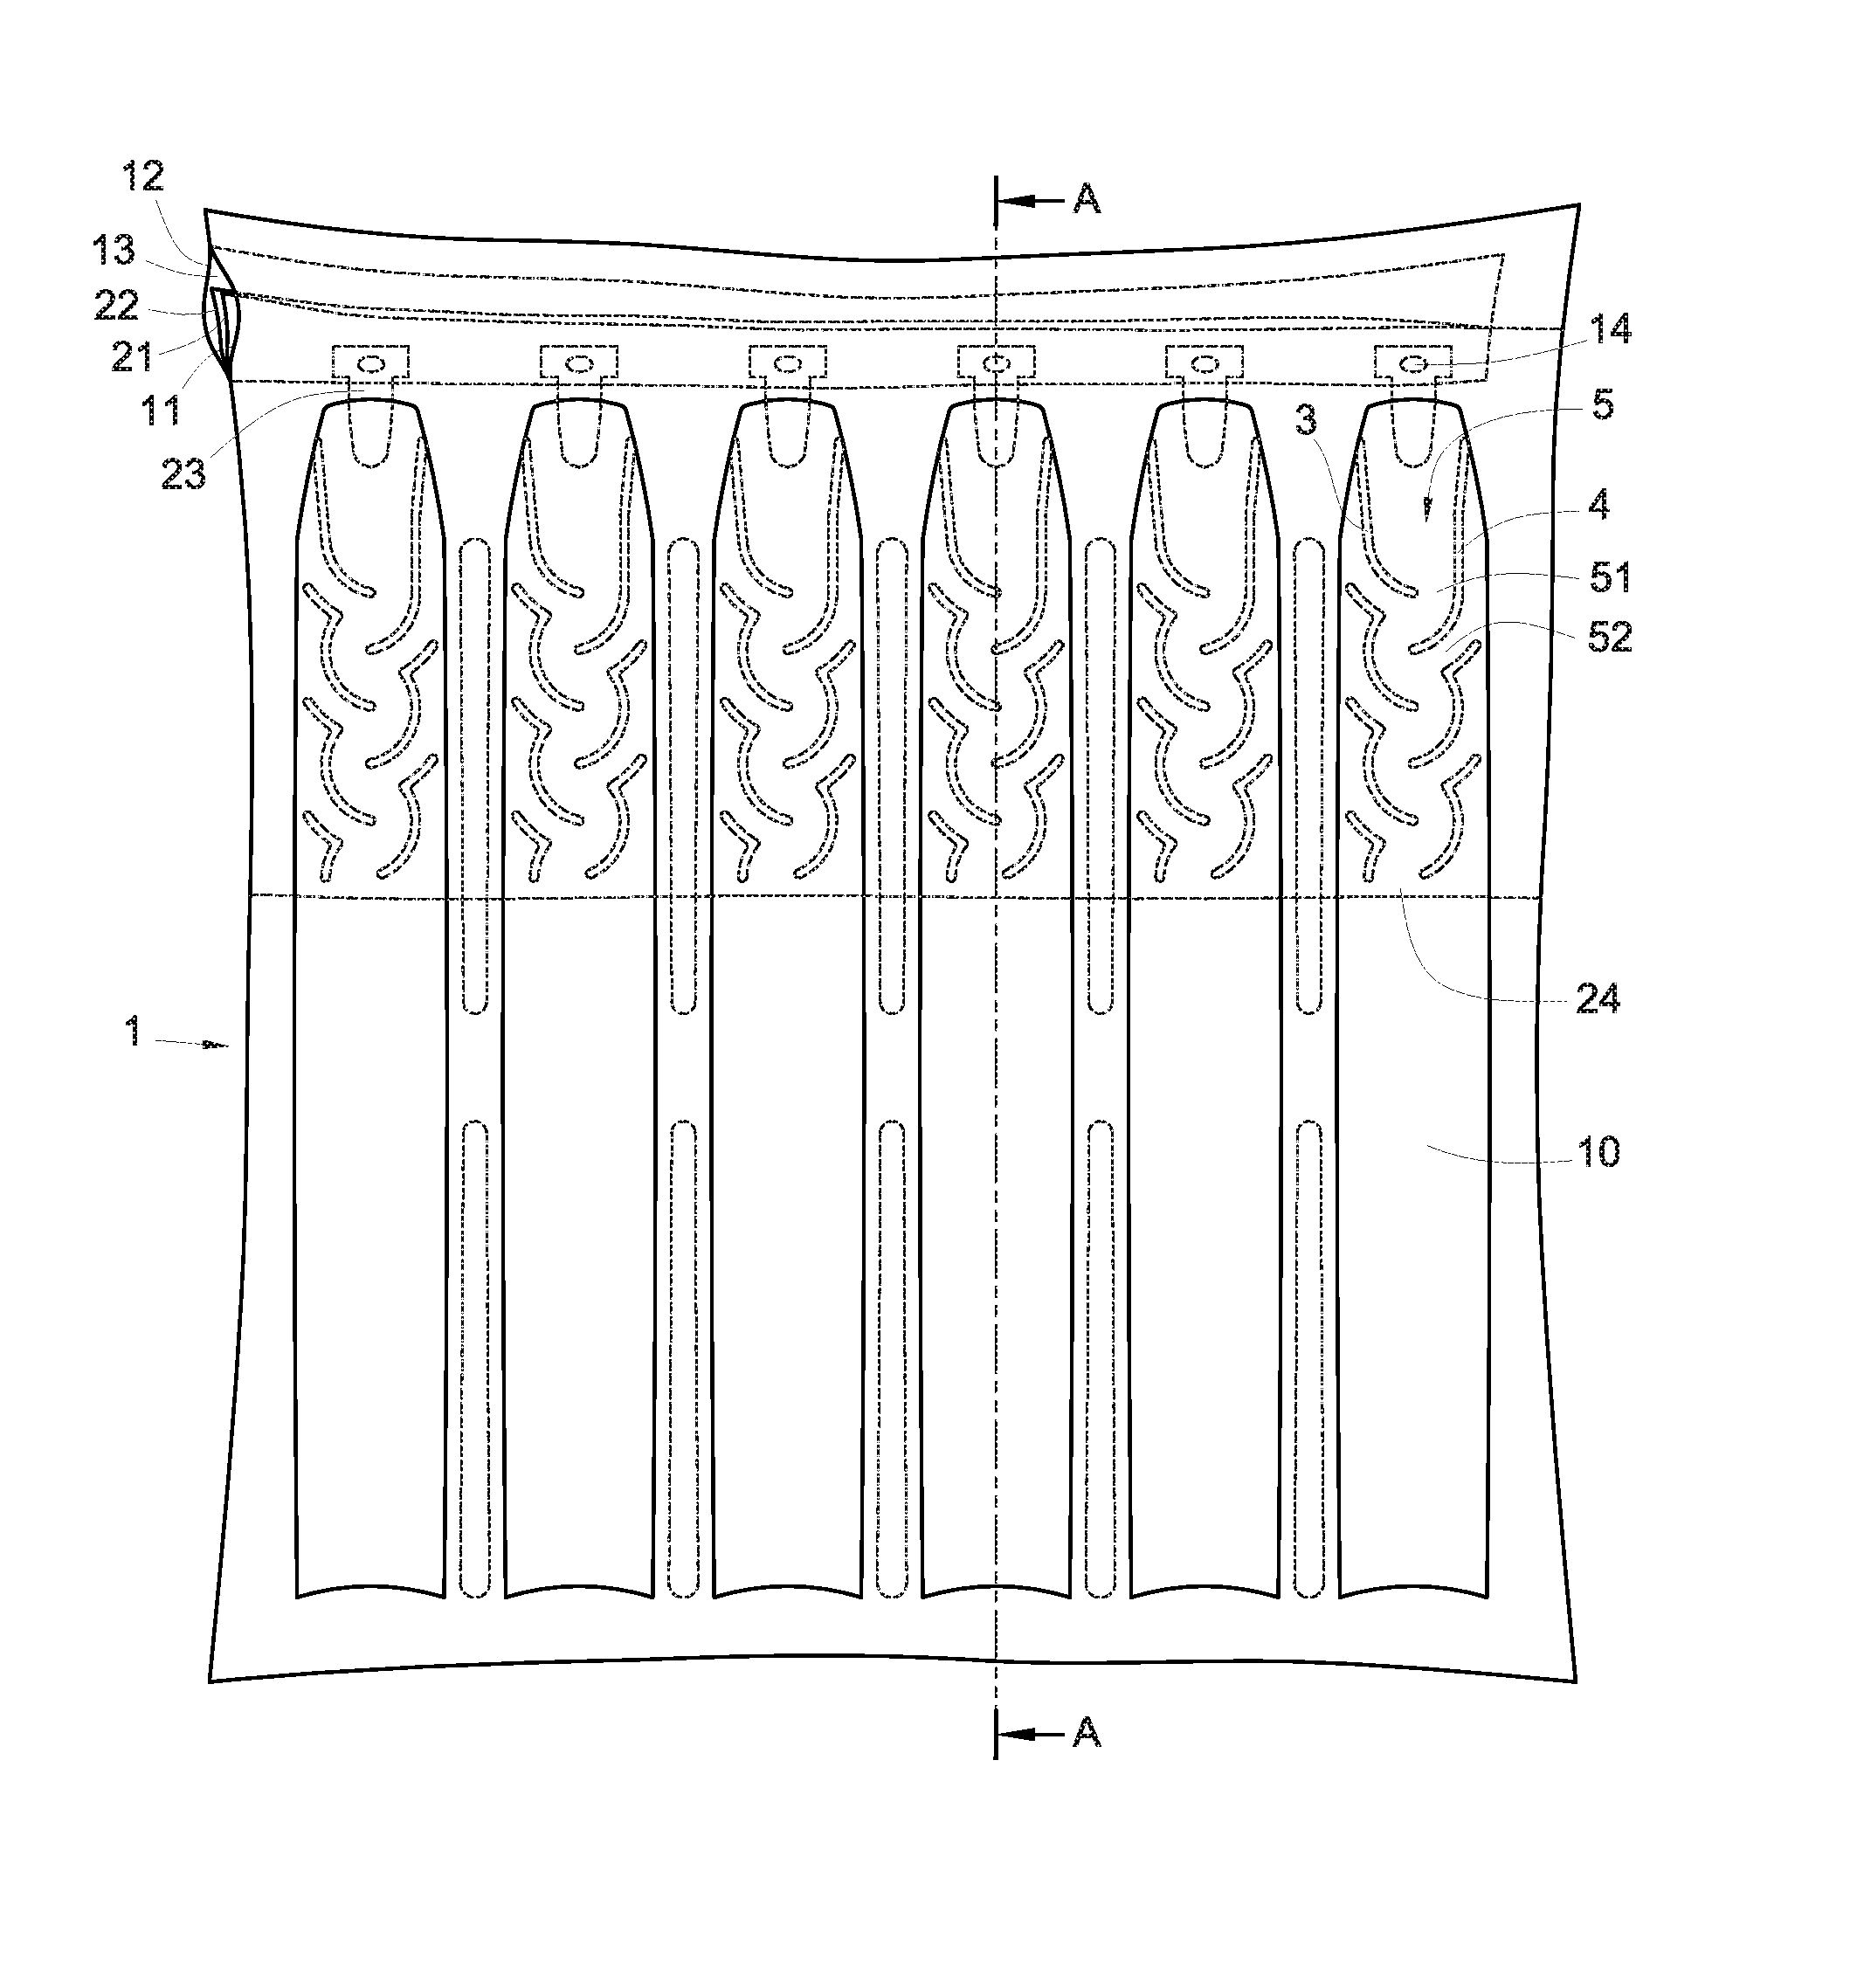 Nonlinear air stop valve structure